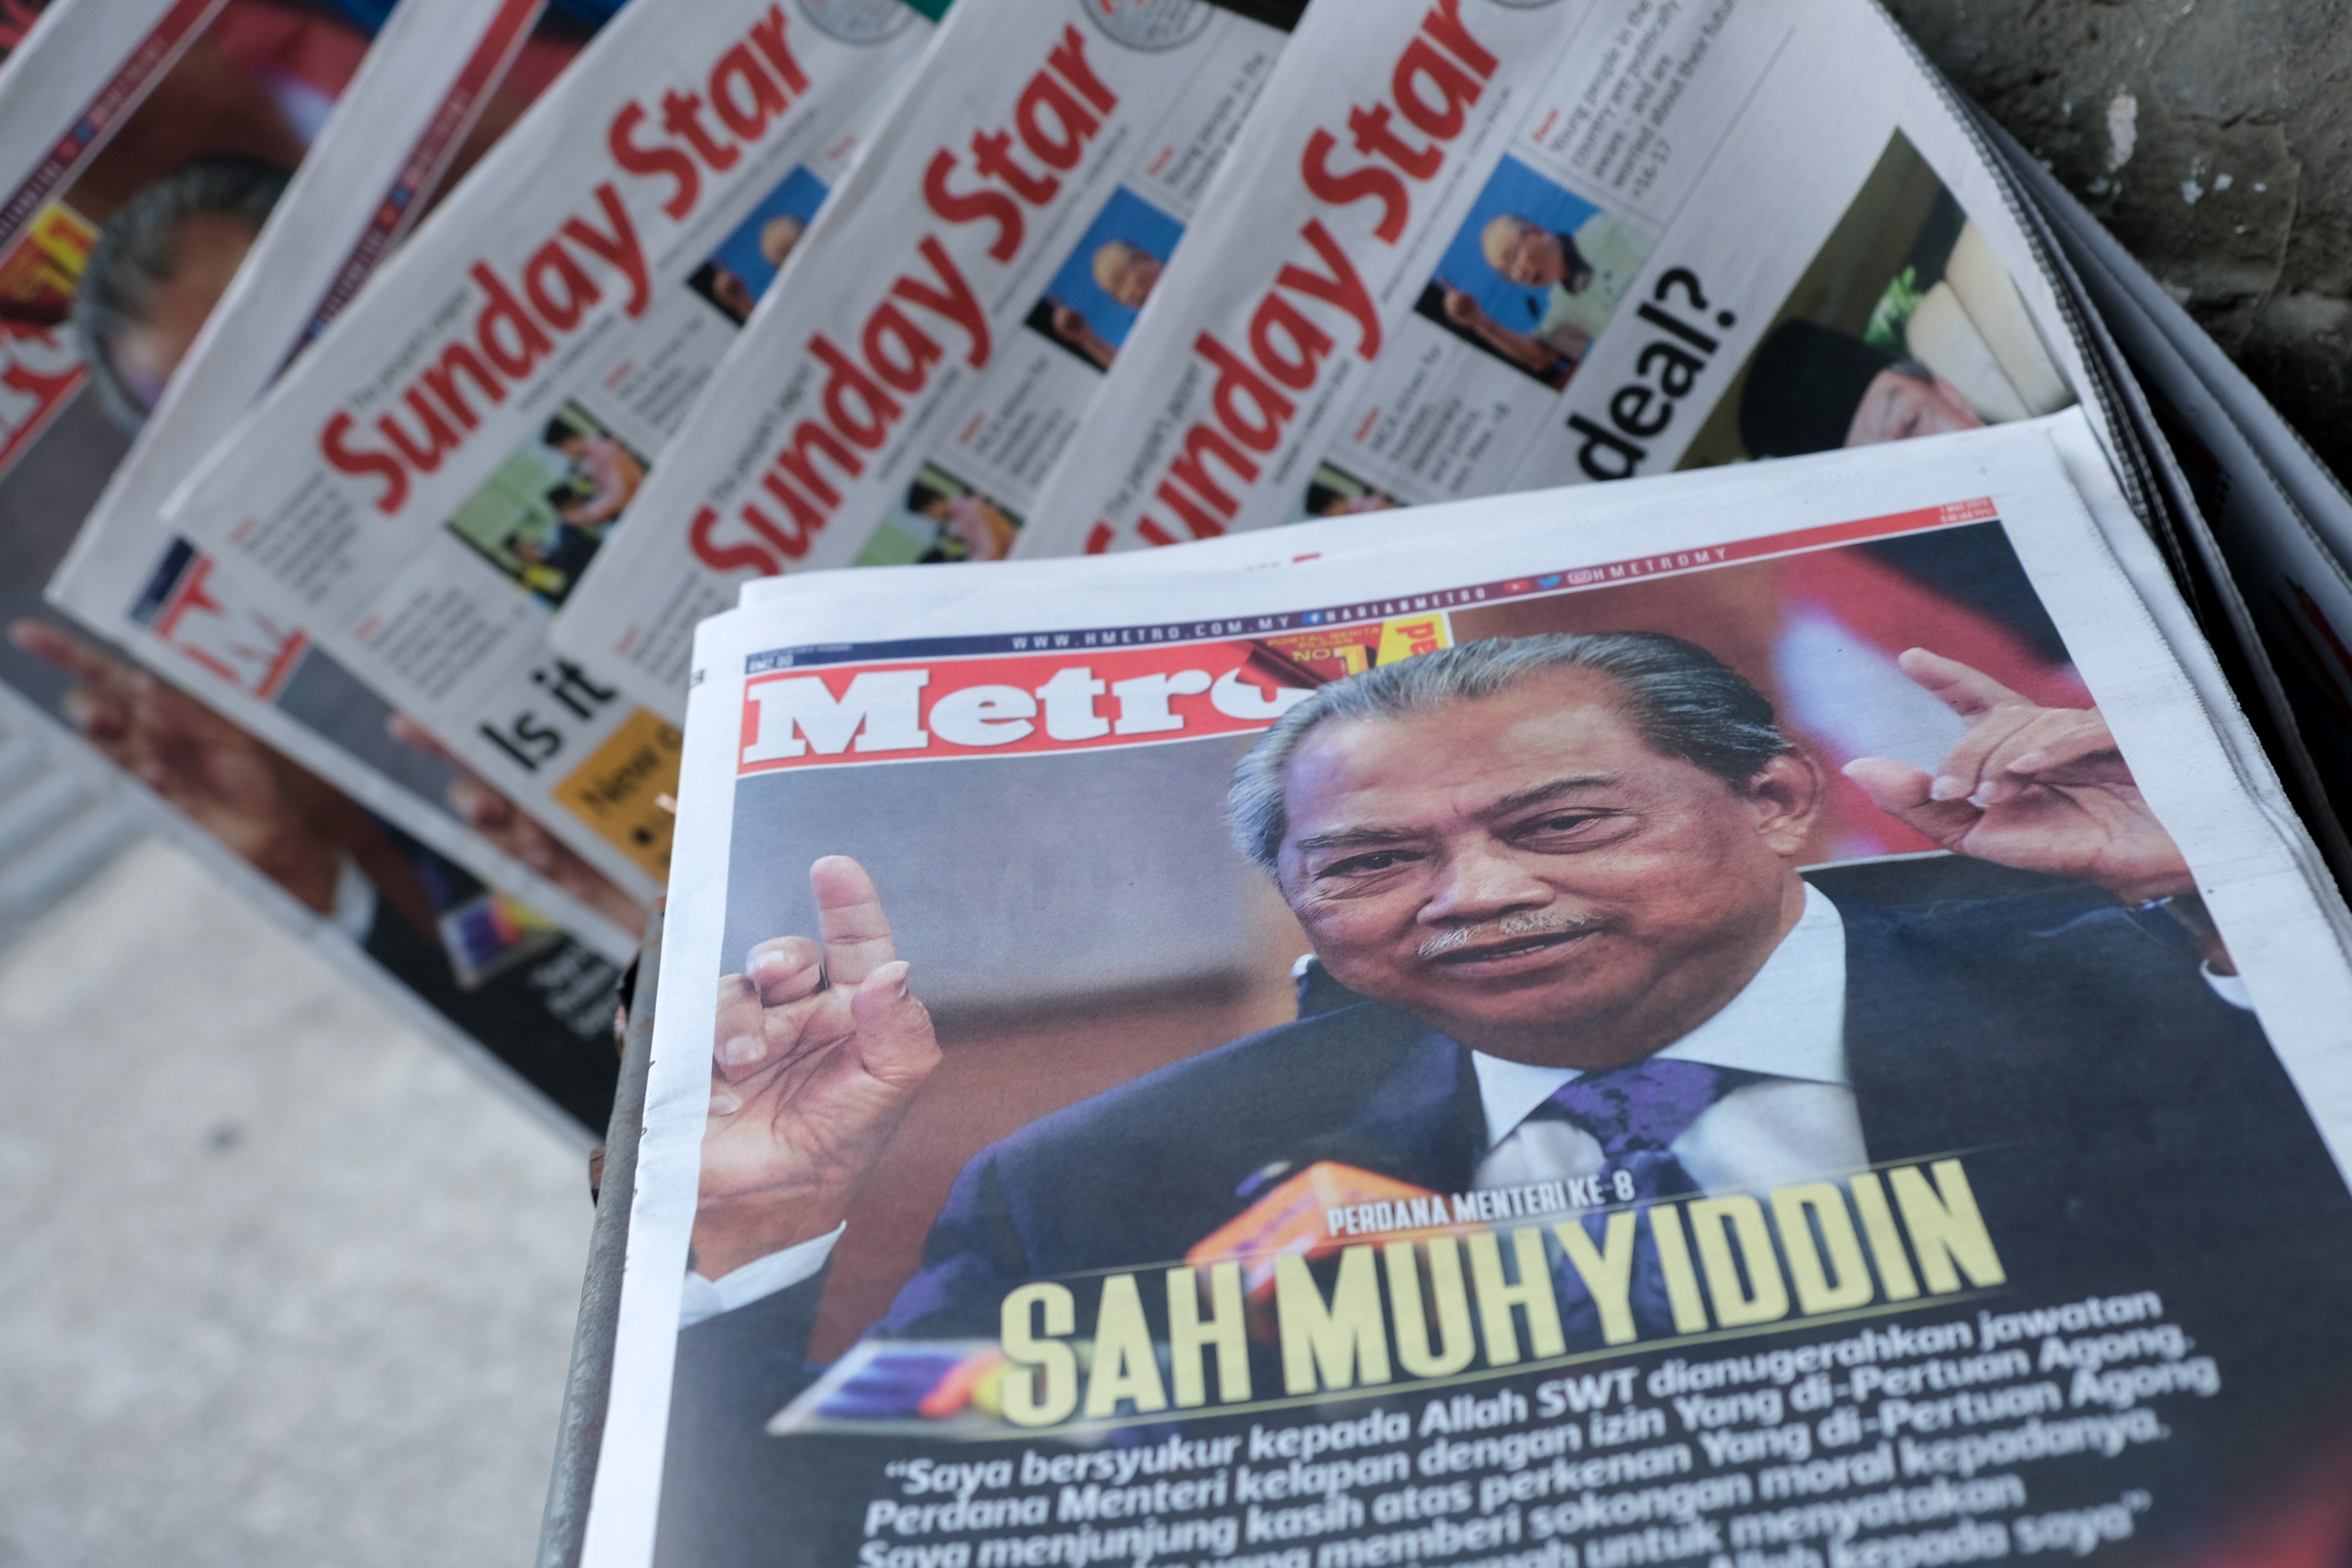 Malaysian prime minister-designate Muhyiddin Yassin features on the cover of a newspaper displayed at a stand in Kuala Lumpur on March 1. Muhyiddin, 72, was named prime minister the previous day by the country’s monarch to end a six-day tussle for power, after Mahathir Mohamad suddenly resigned. Photo: Bloomberg